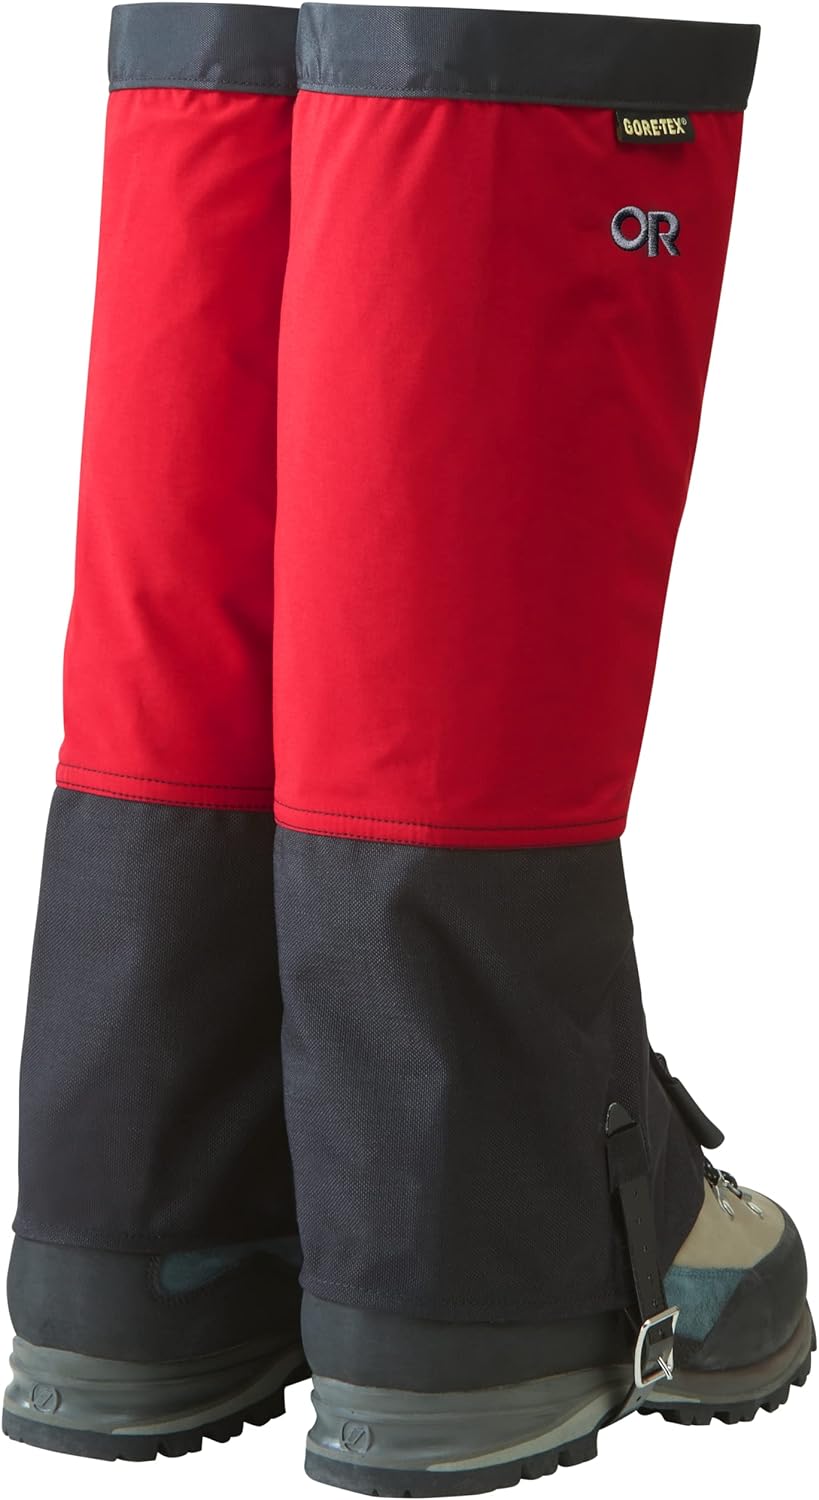 Shop The Latest >Outdoor Research Men's Rocky Mountain High Gaiters > *Only $124.53*> From The Top Brand > *Outdoor researchl* > Shop Now and Get Free Shipping On Orders Over $45.00 >*Shop Earth Foot*